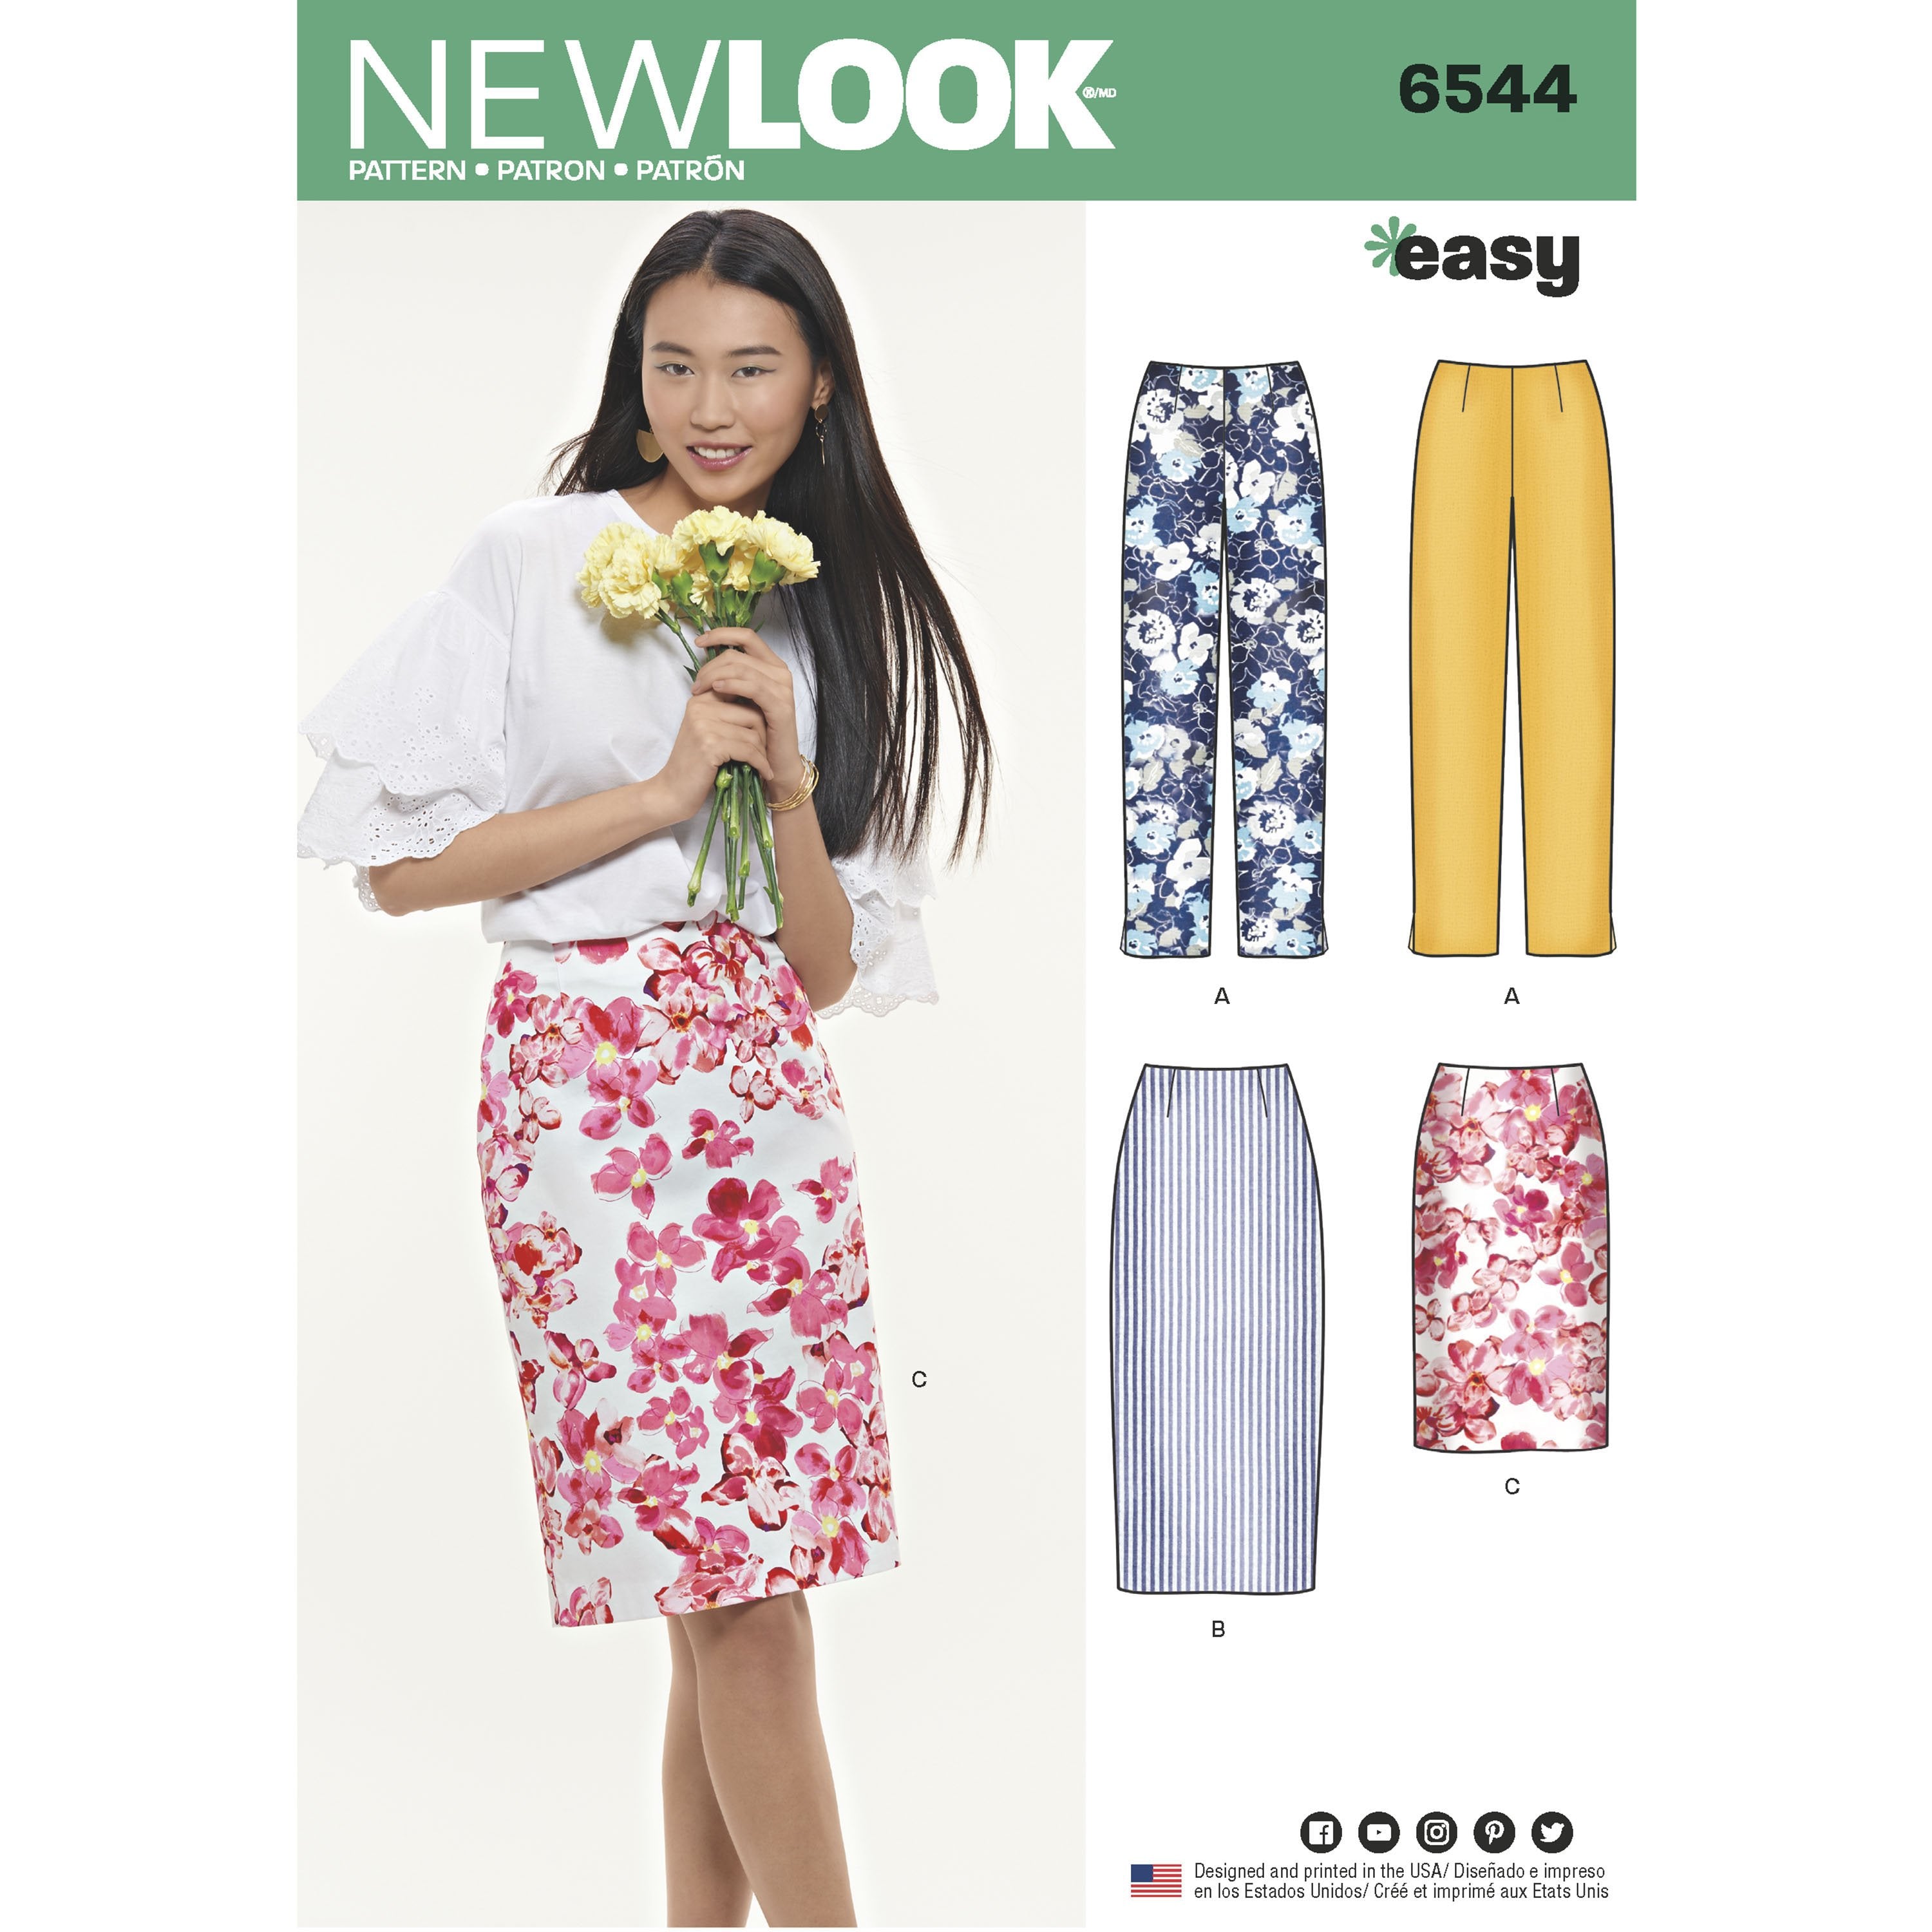 NL6544 Pencil Skirt Pattern | Two Lengths from Jaycotts Sewing Supplies